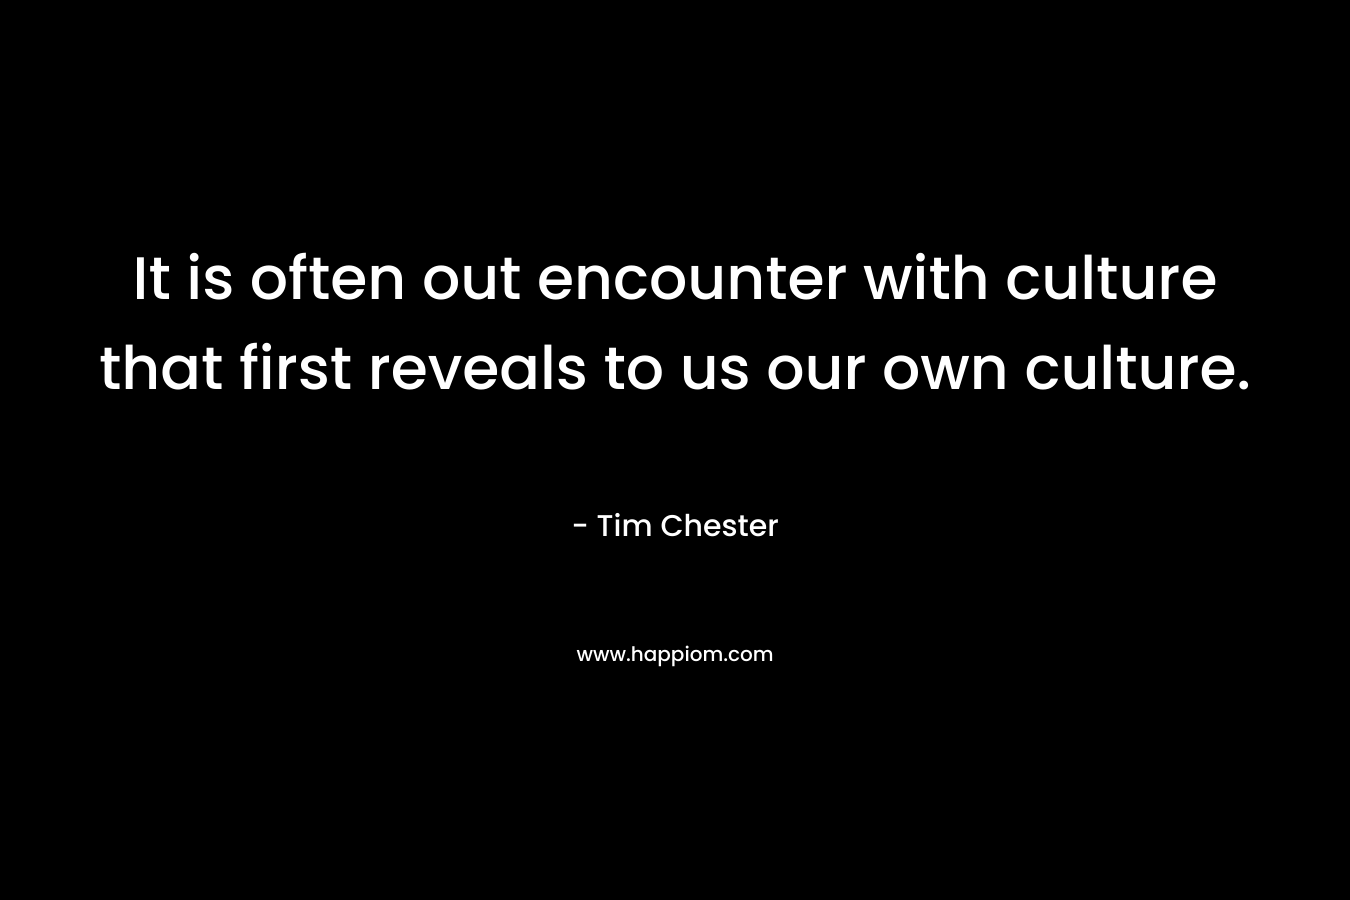 It is often out encounter with culture that first reveals to us our own culture.